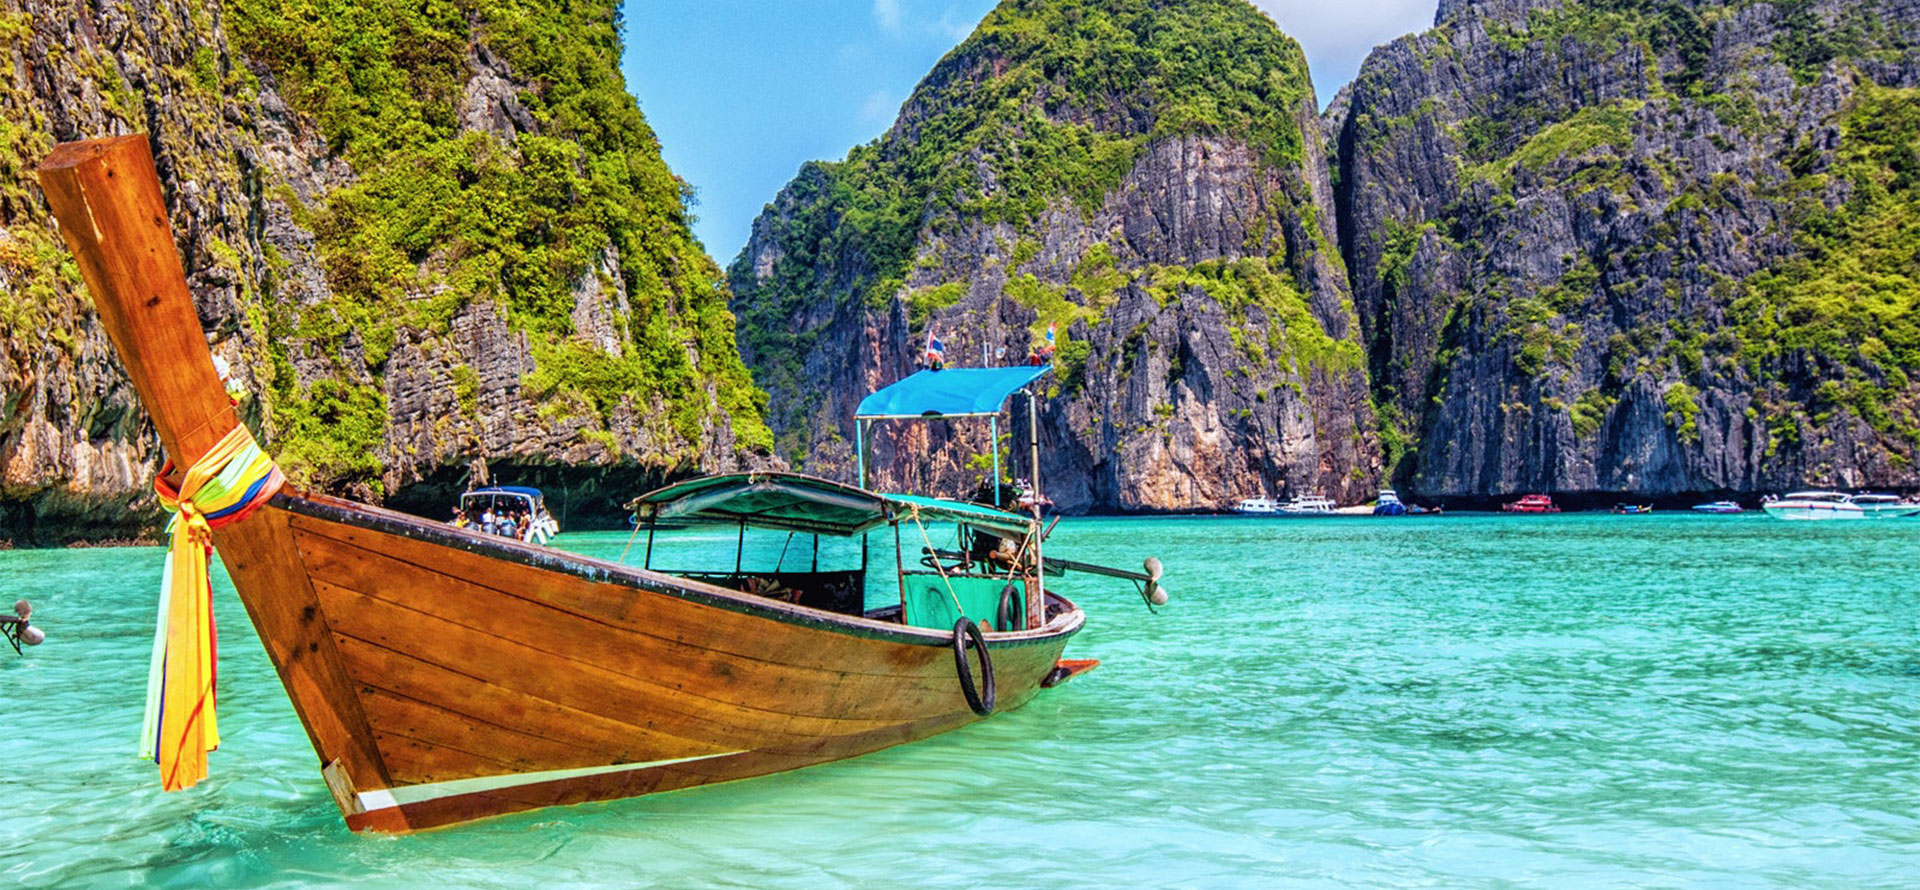 Boat in Thailand.